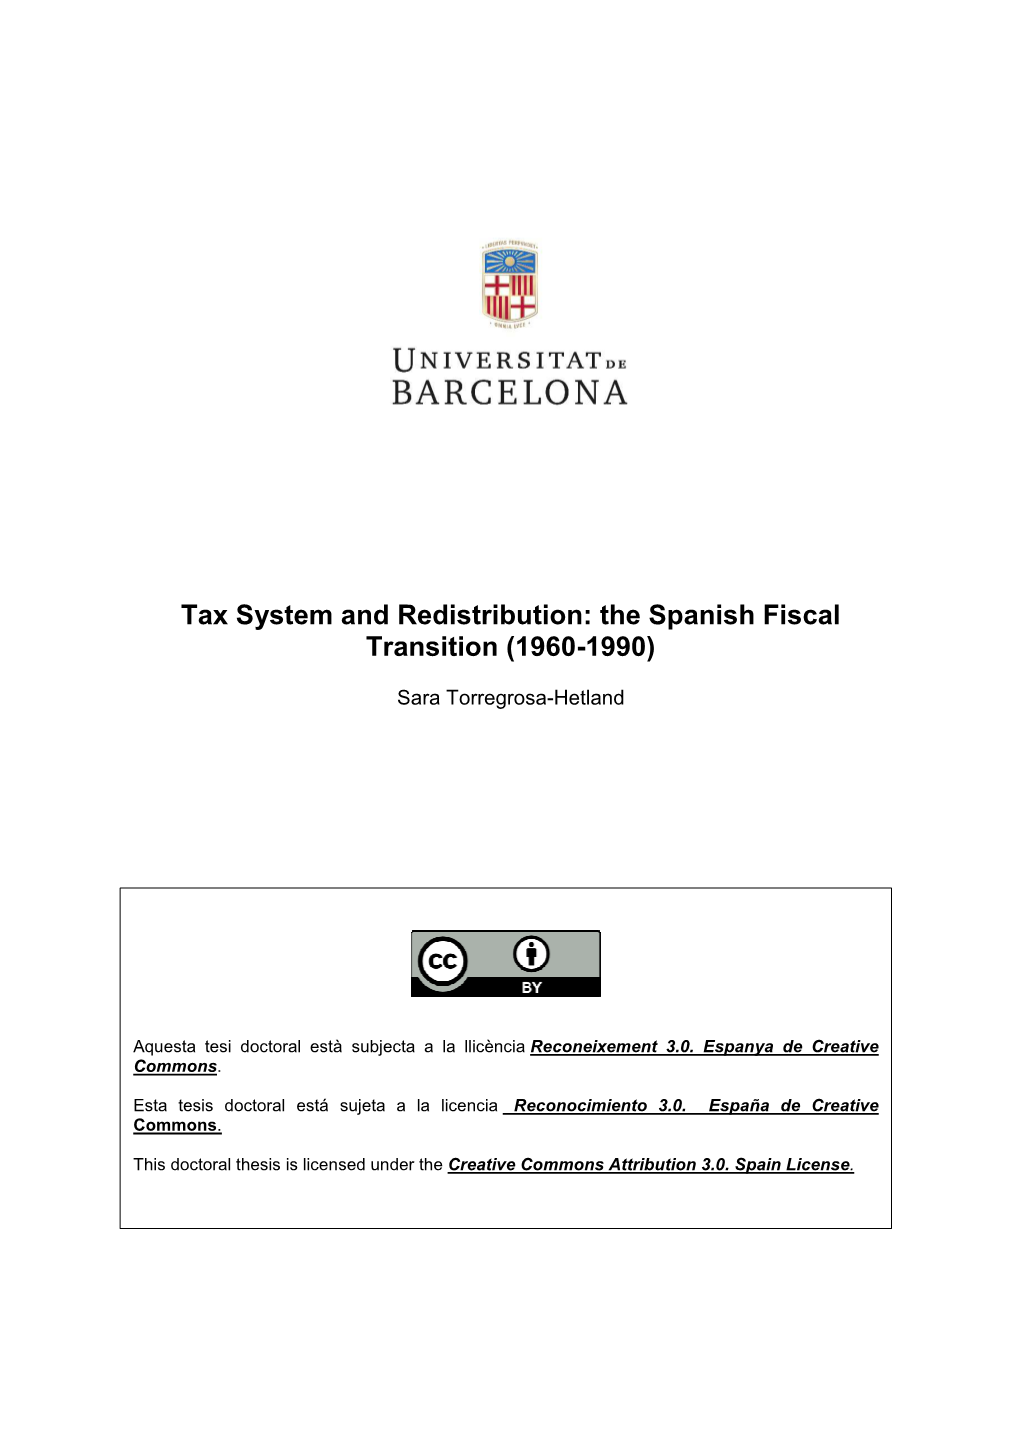 Tax System and Redistribution: the Spanish Fiscal Transition (1960-1990)